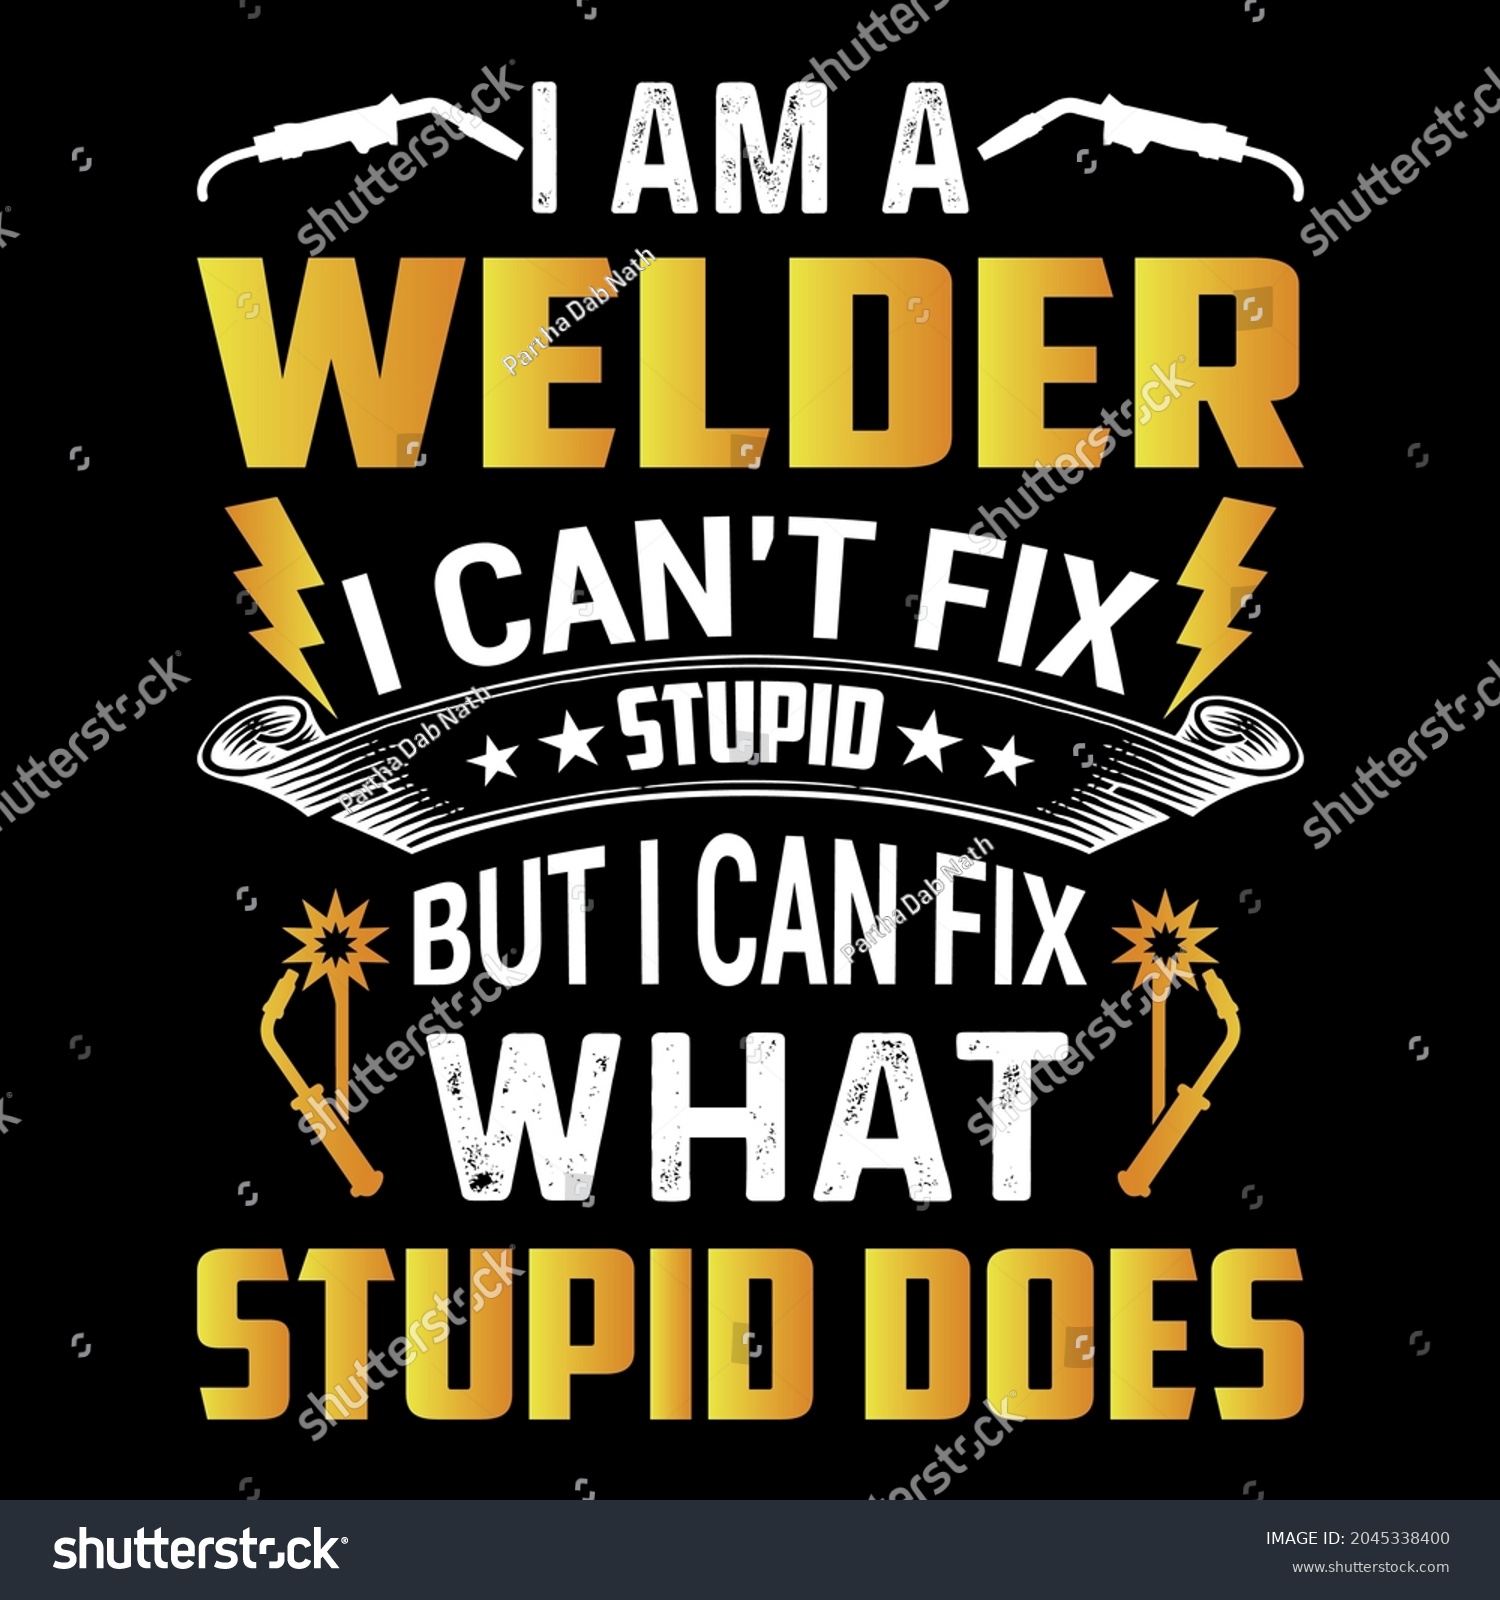 Welder Cant Fix Stupid Can Fix Stock Vector (Royalty Free) 2045338400 ...